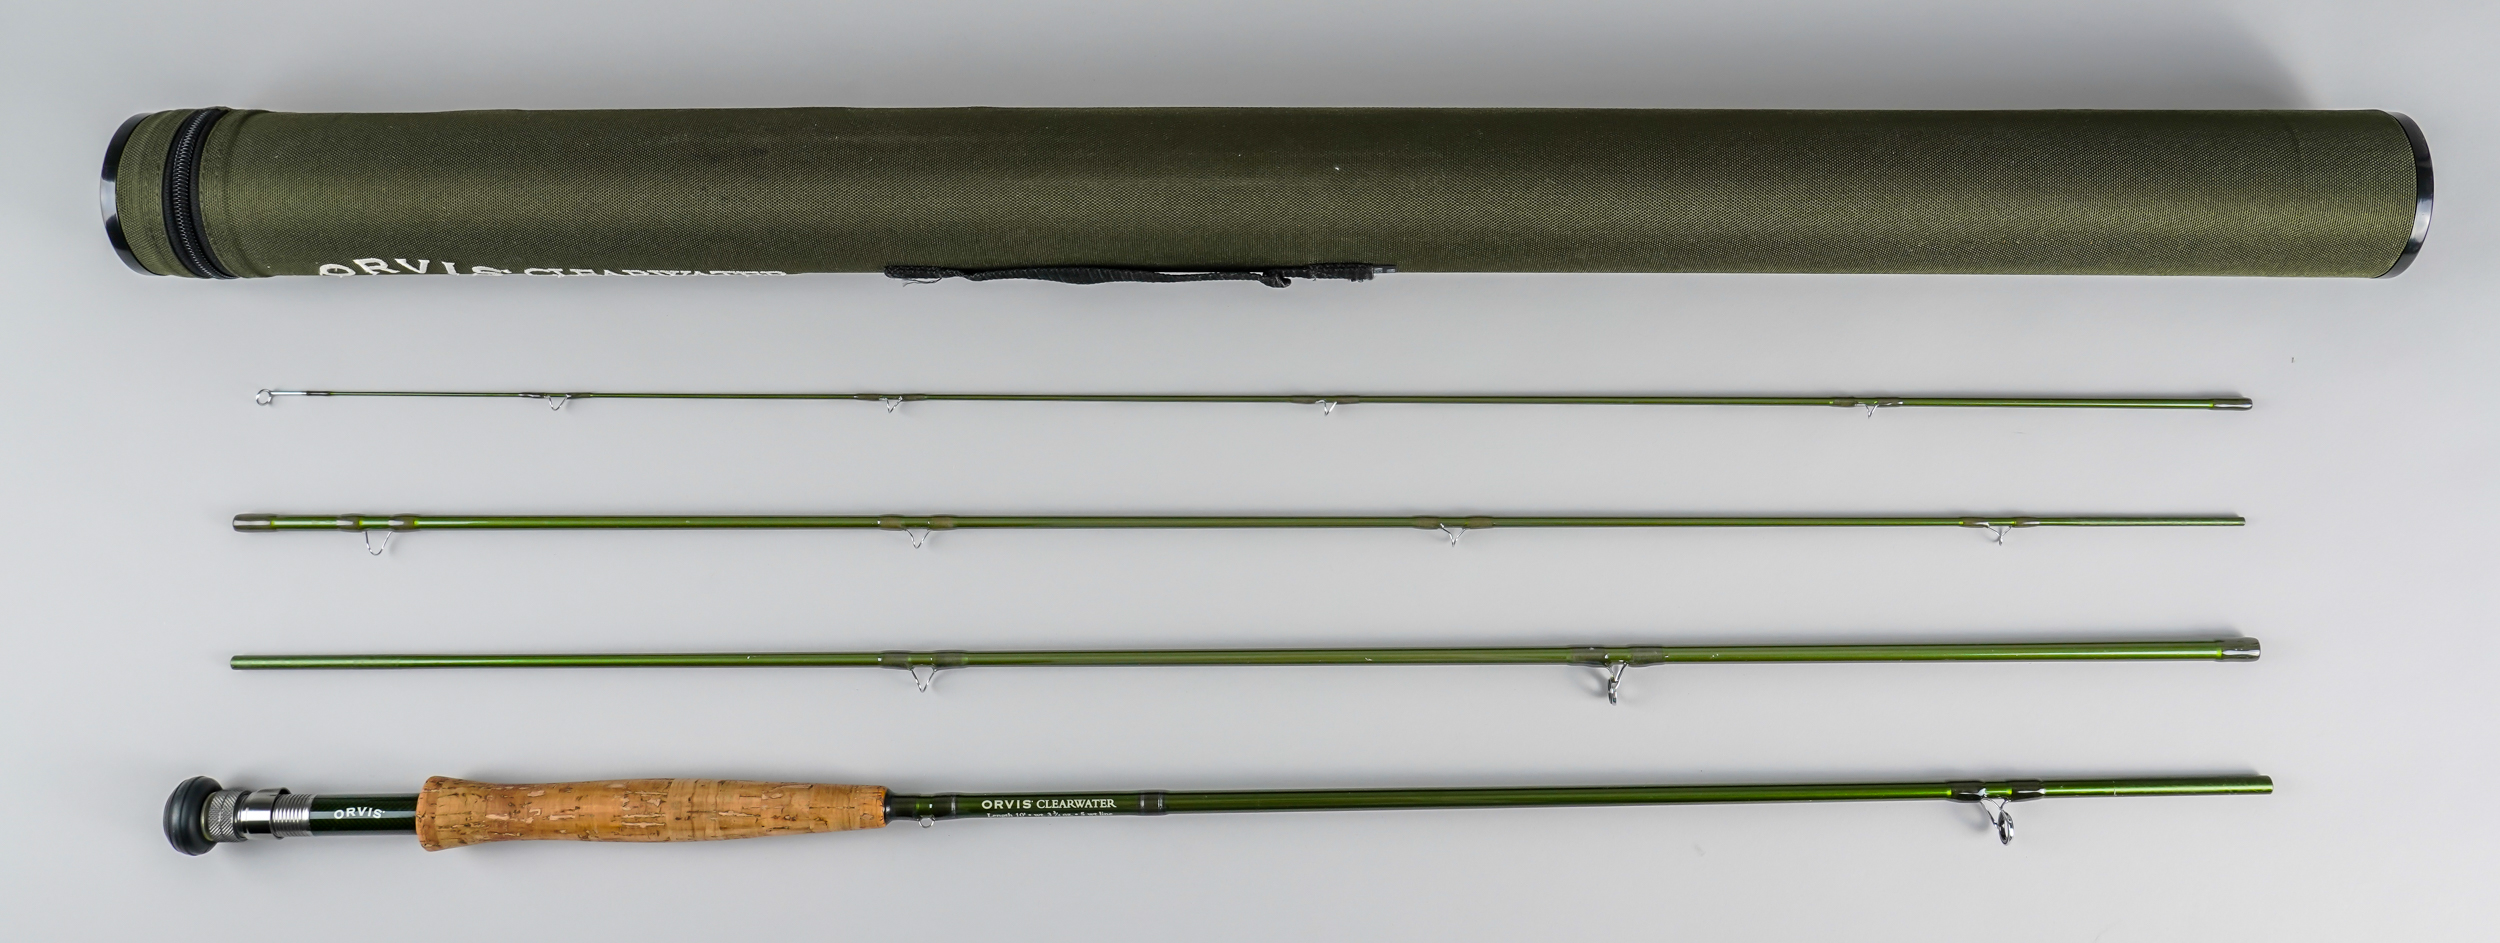 ORVIS: ROD NO. 105 A CLEAR WATER FLY ROD - Image 3 of 4